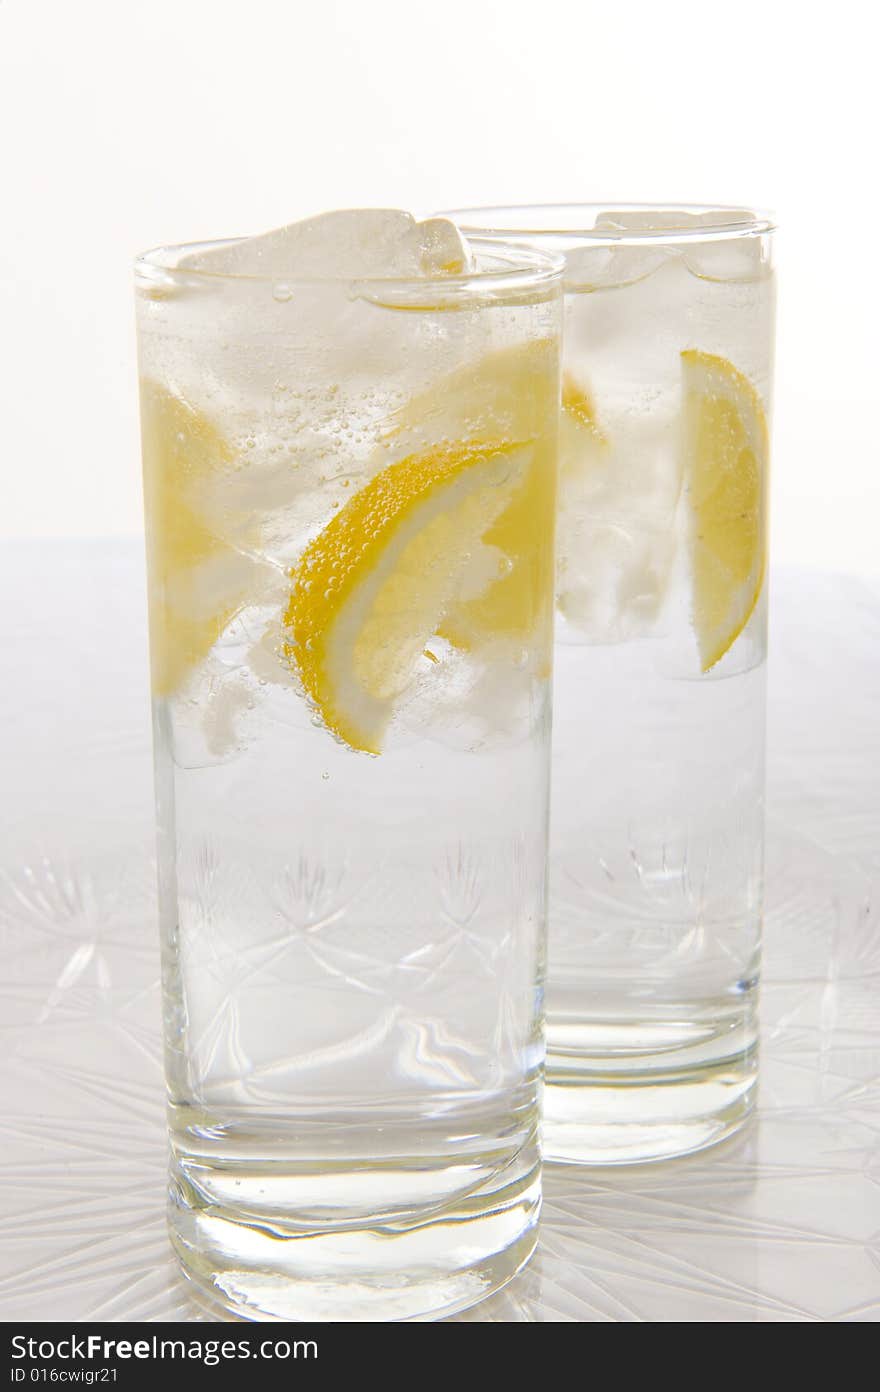 Sparkling water with slices of fresh lemon and lime on a white background. Sparkling water with slices of fresh lemon and lime on a white background.